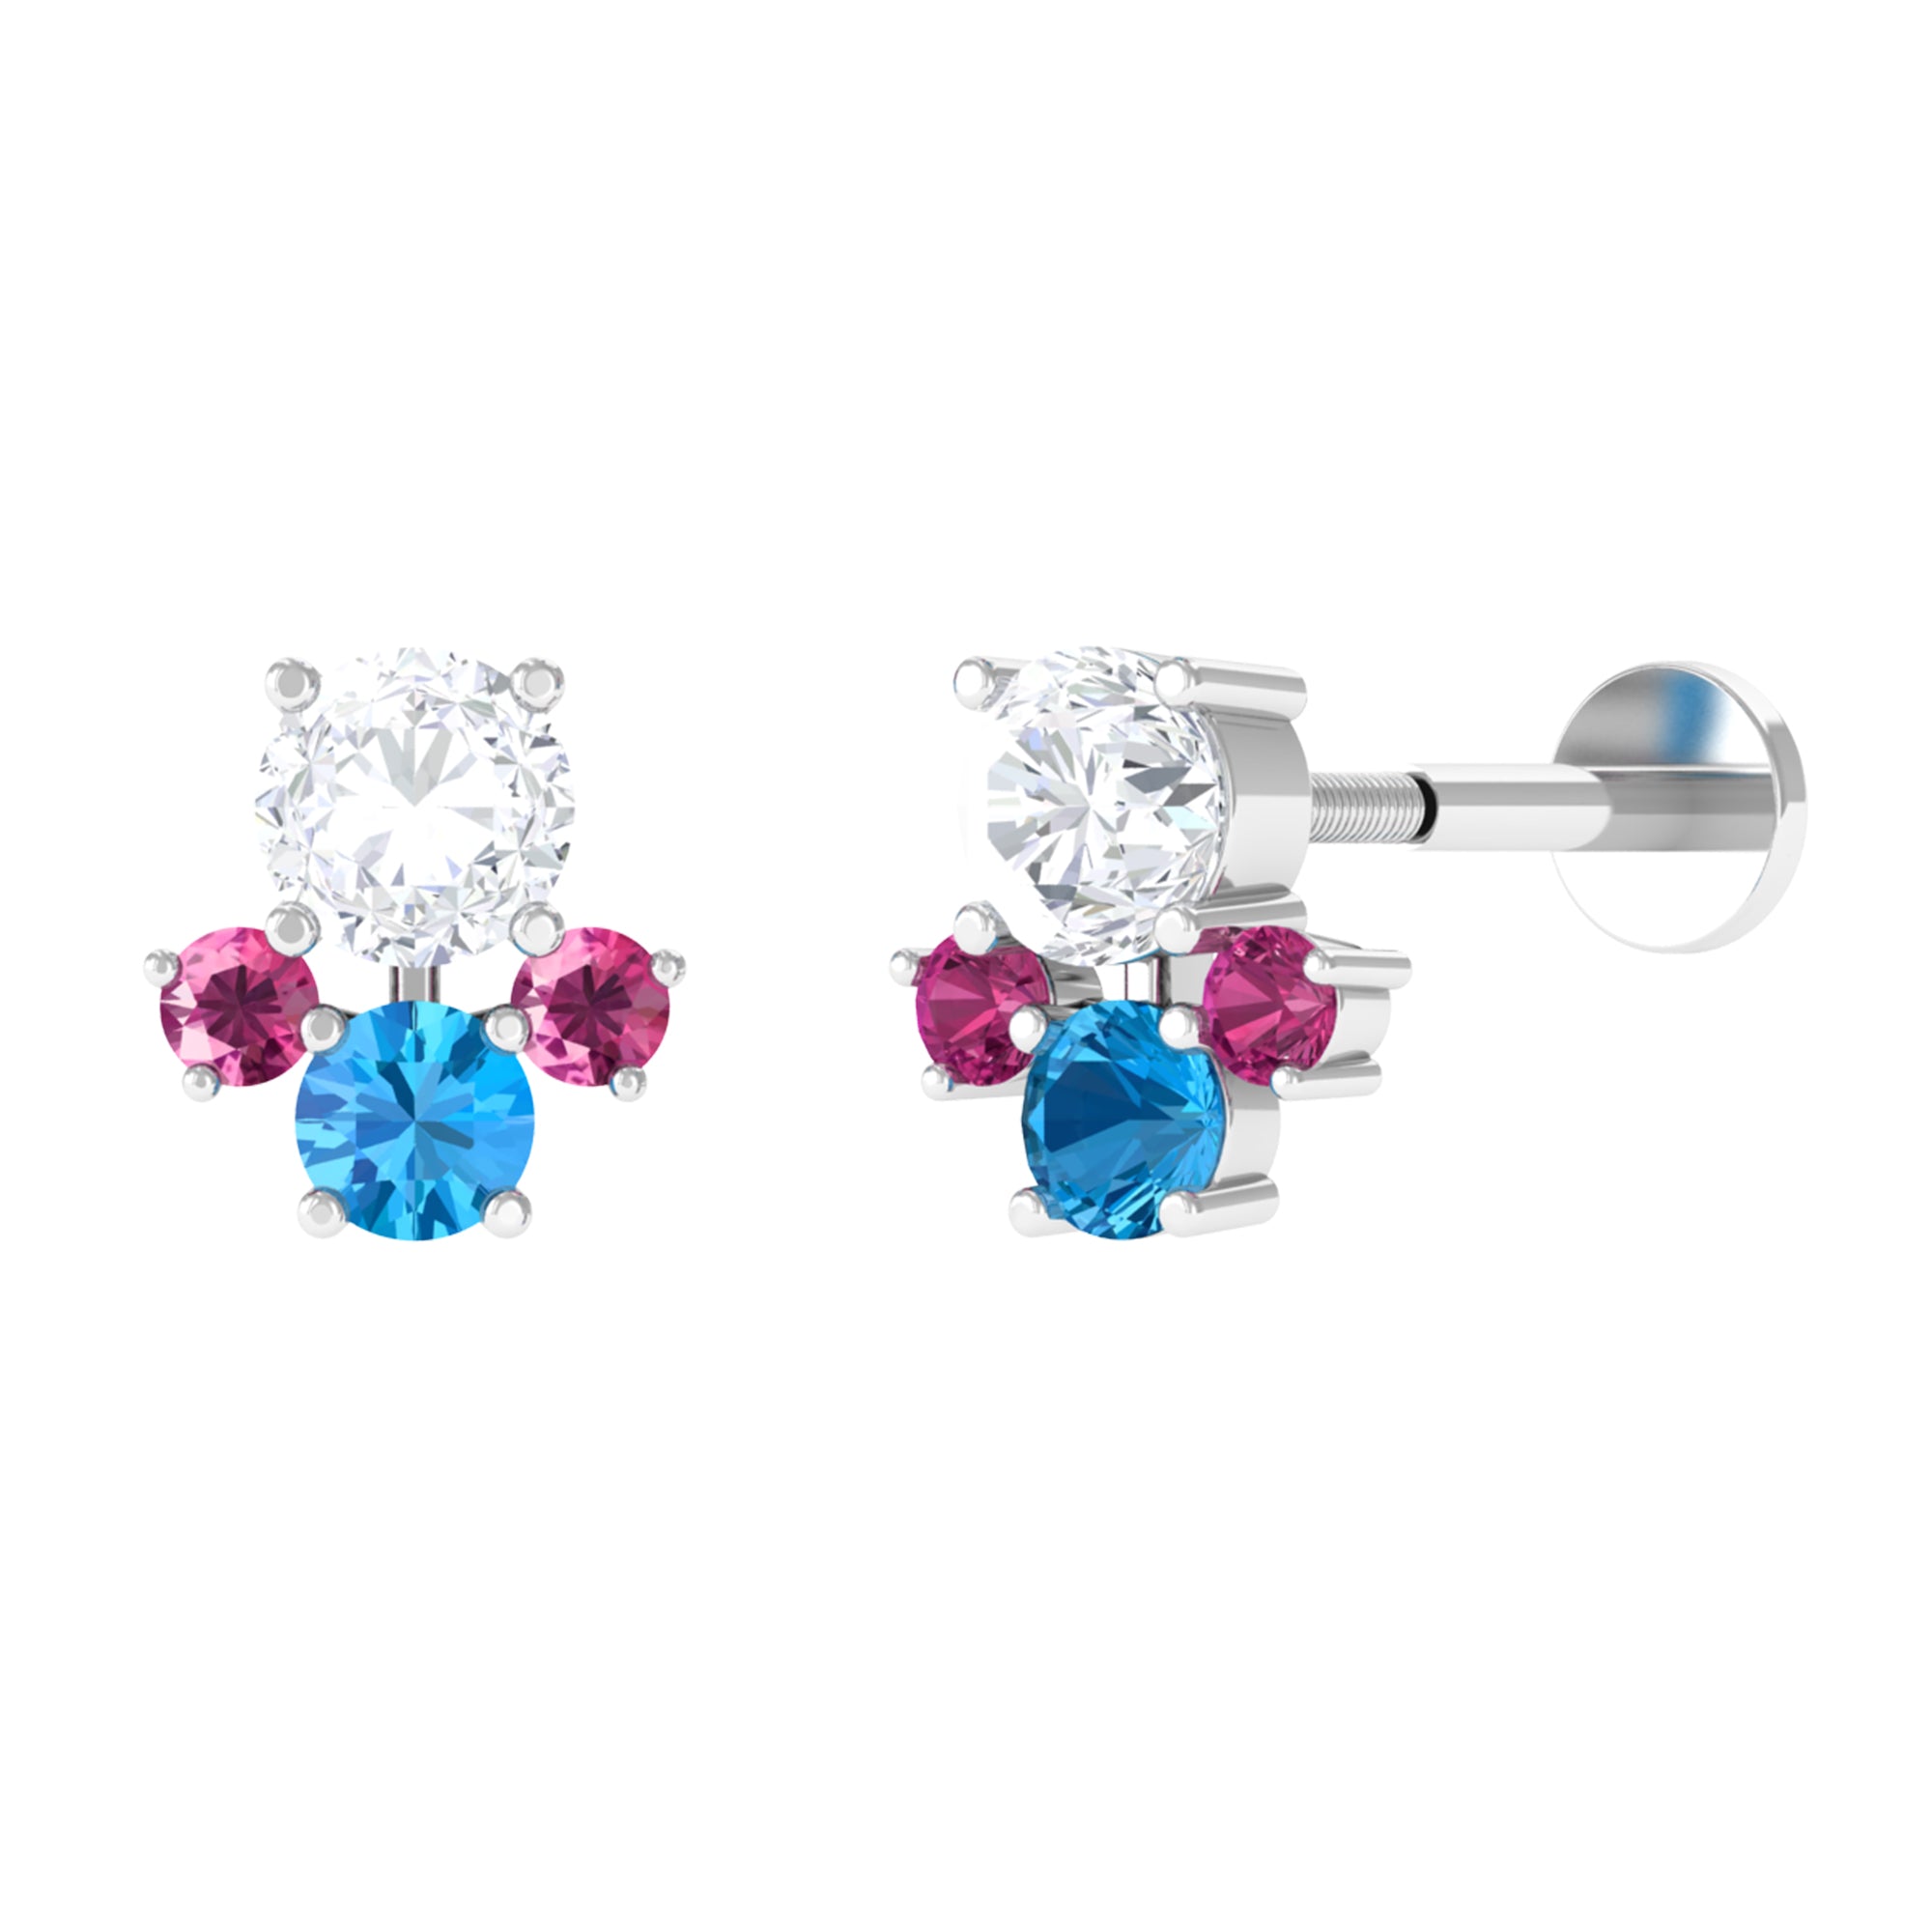 Sparkanite Jewels-Moissanite Cluster Earring with Swiss Blue Topaz and Tourmaline